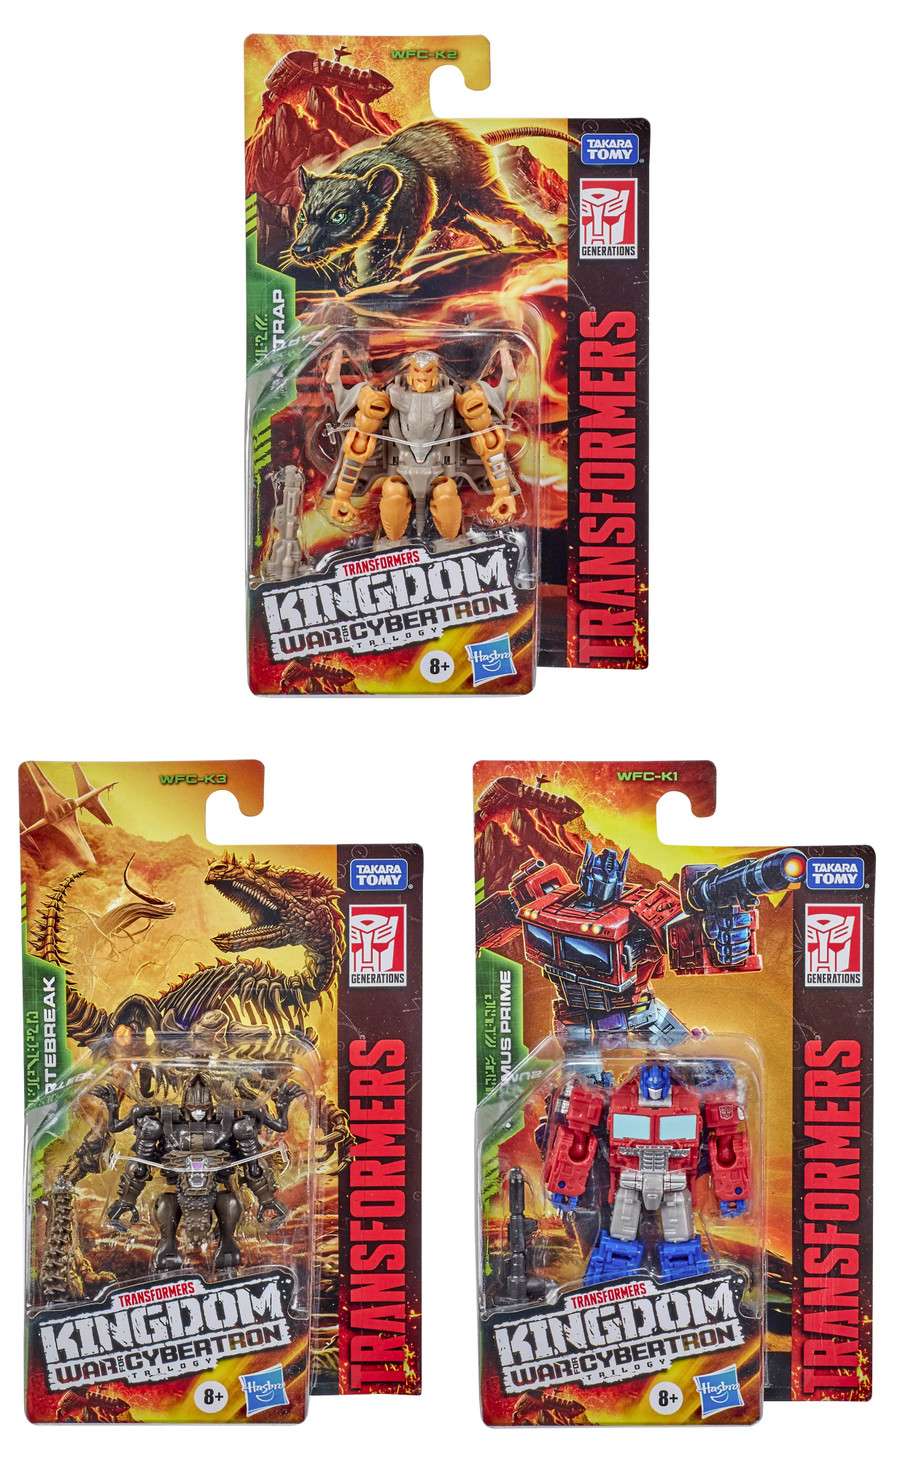 Transformers War for Cybertron: Kingdom - Core Wave 1 Set of 3 Figures